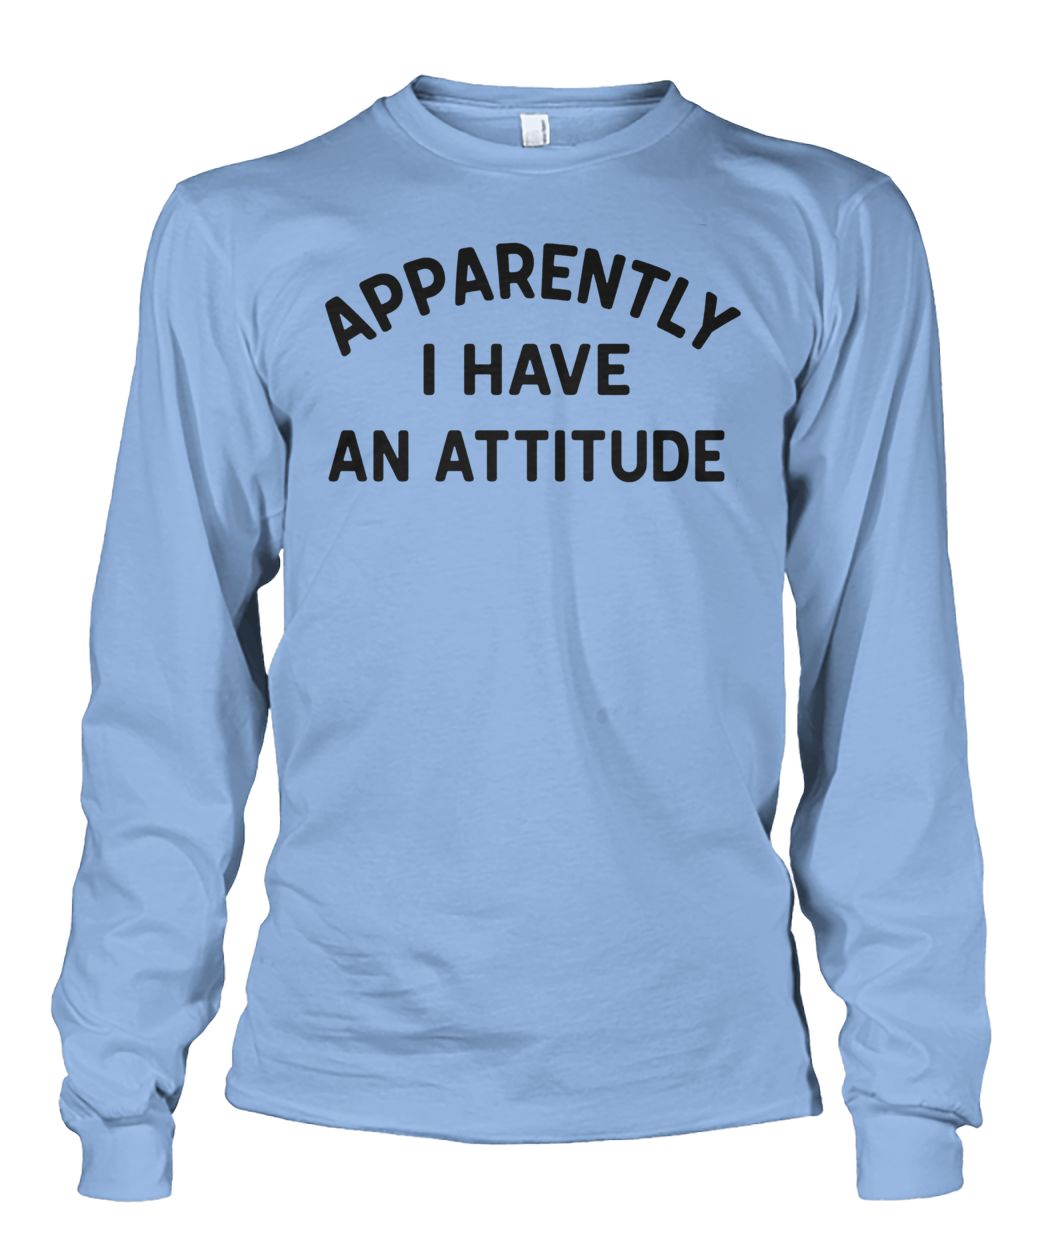 Apparently I have an attitude unisex long sleeve